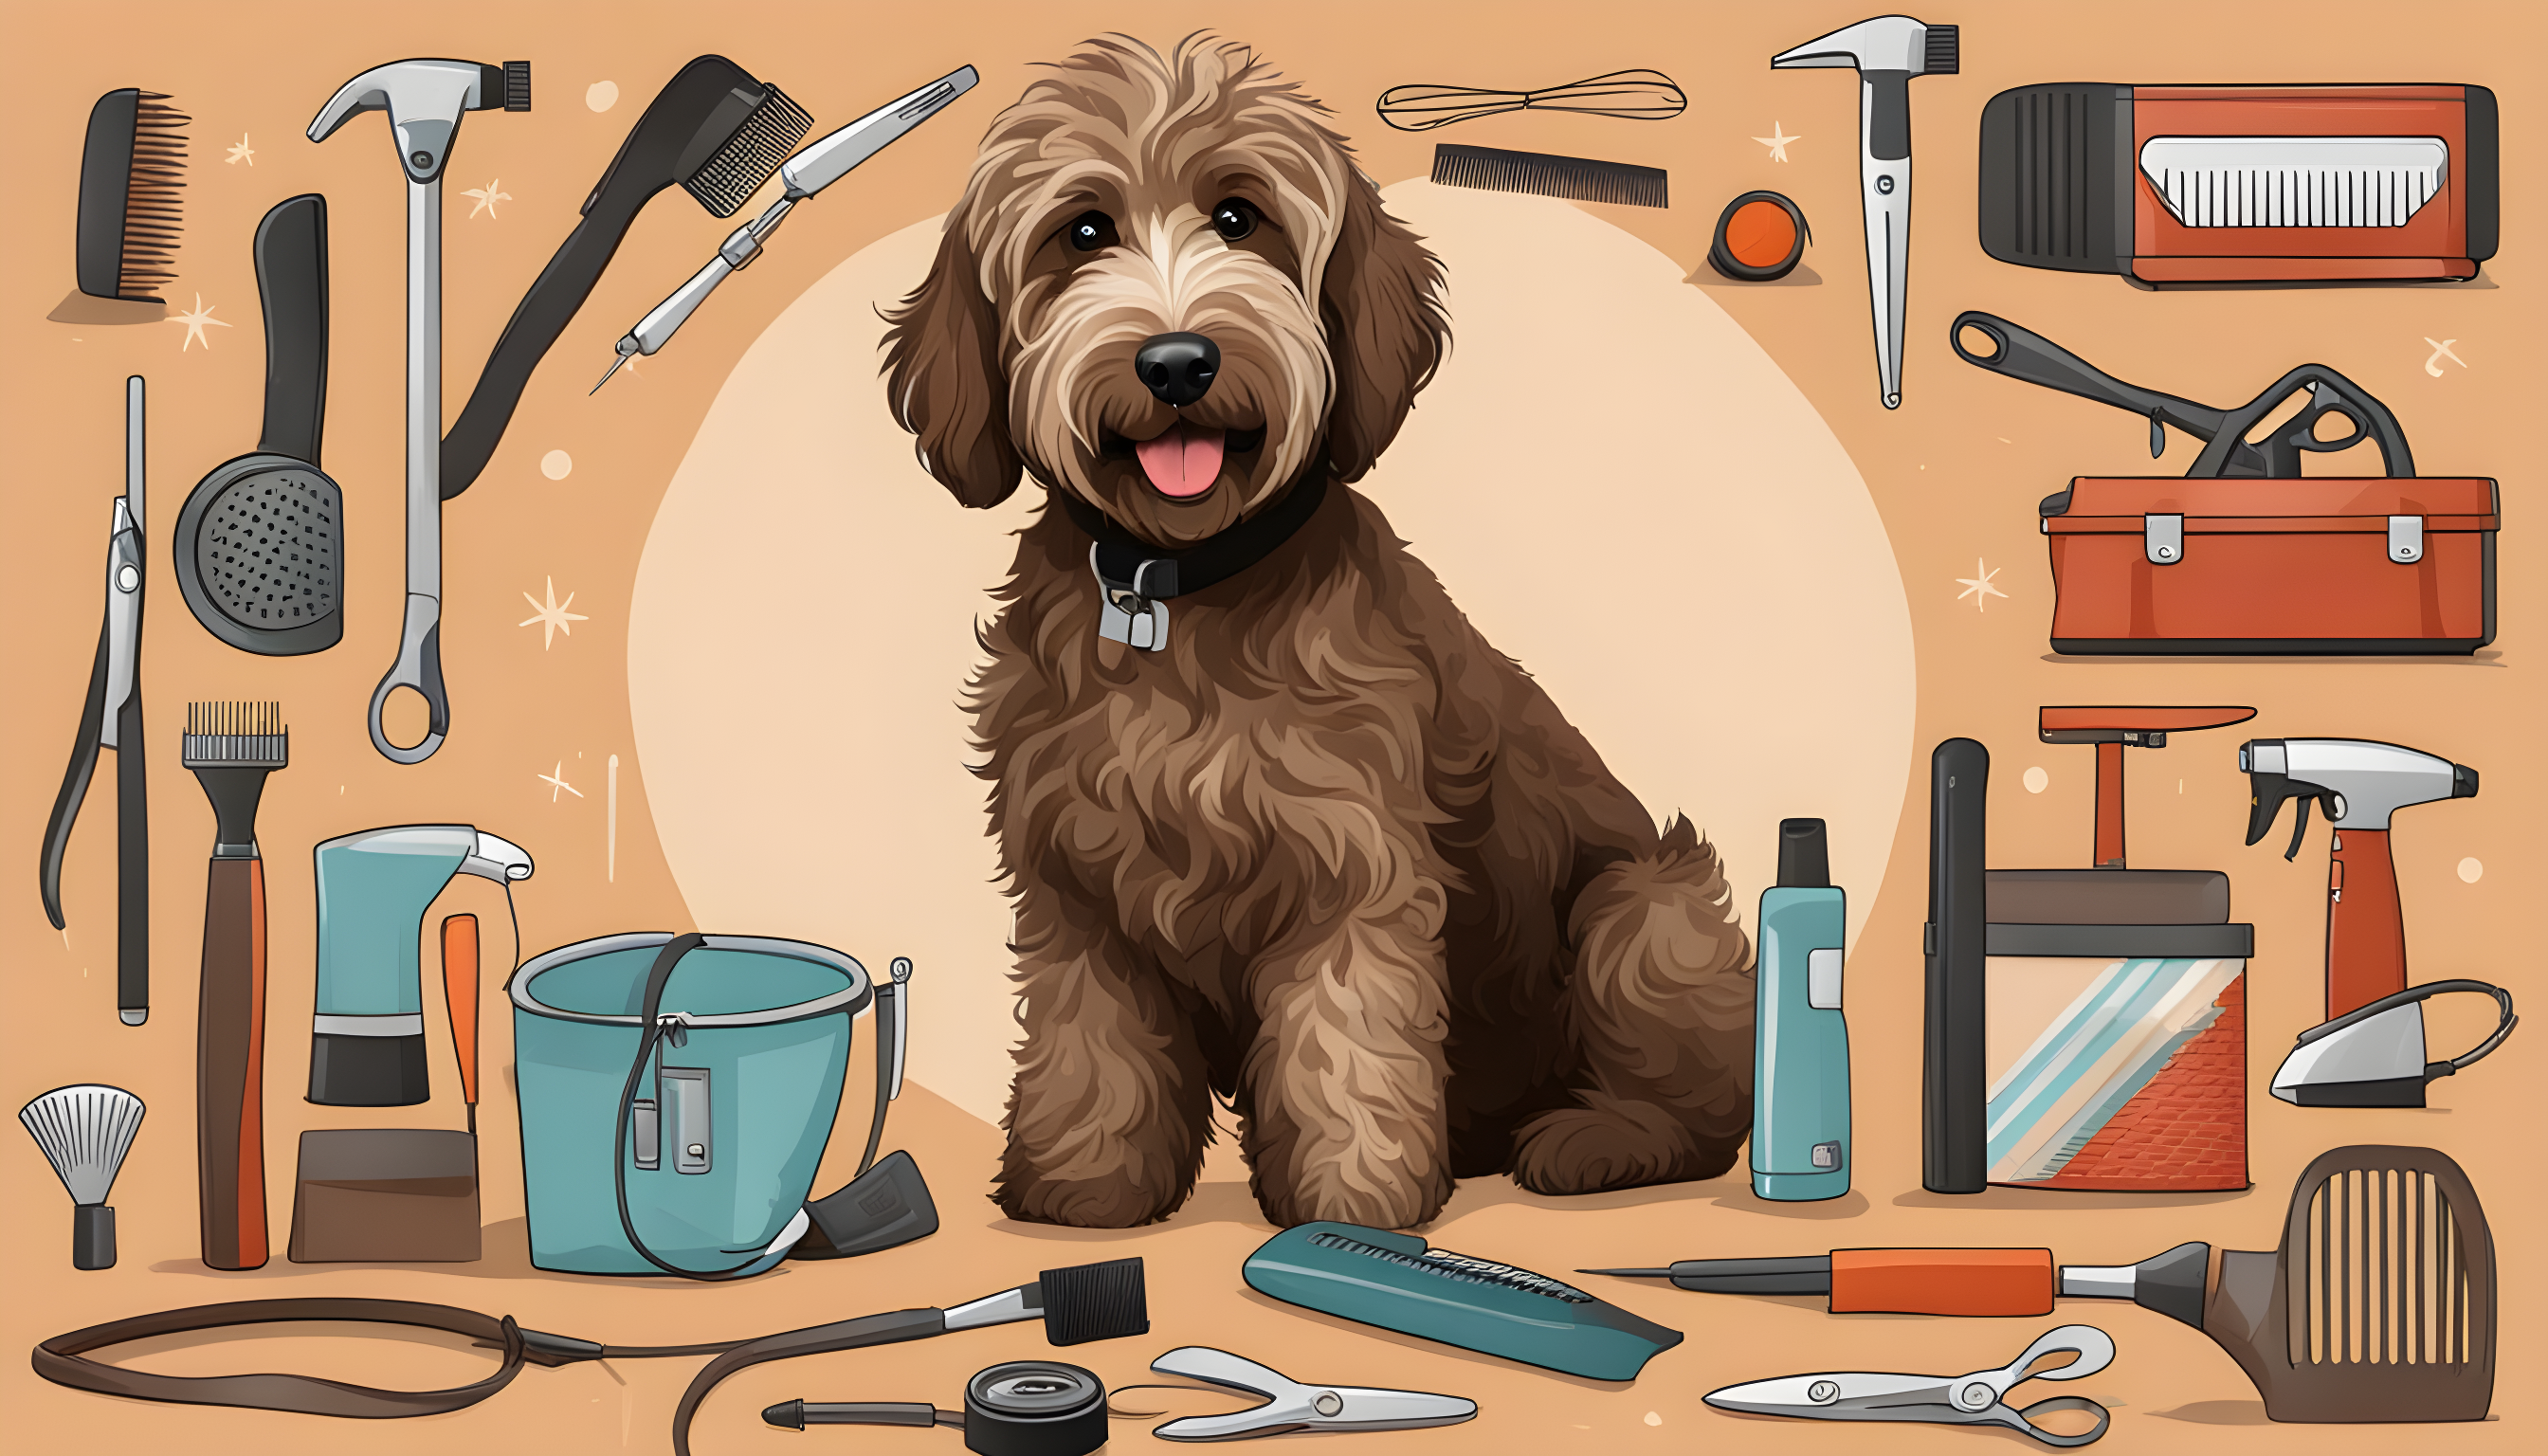 A Labradoodle looking a bit disheveled, surrounded by grooming tools and a 'hypoallergenic?' sign.